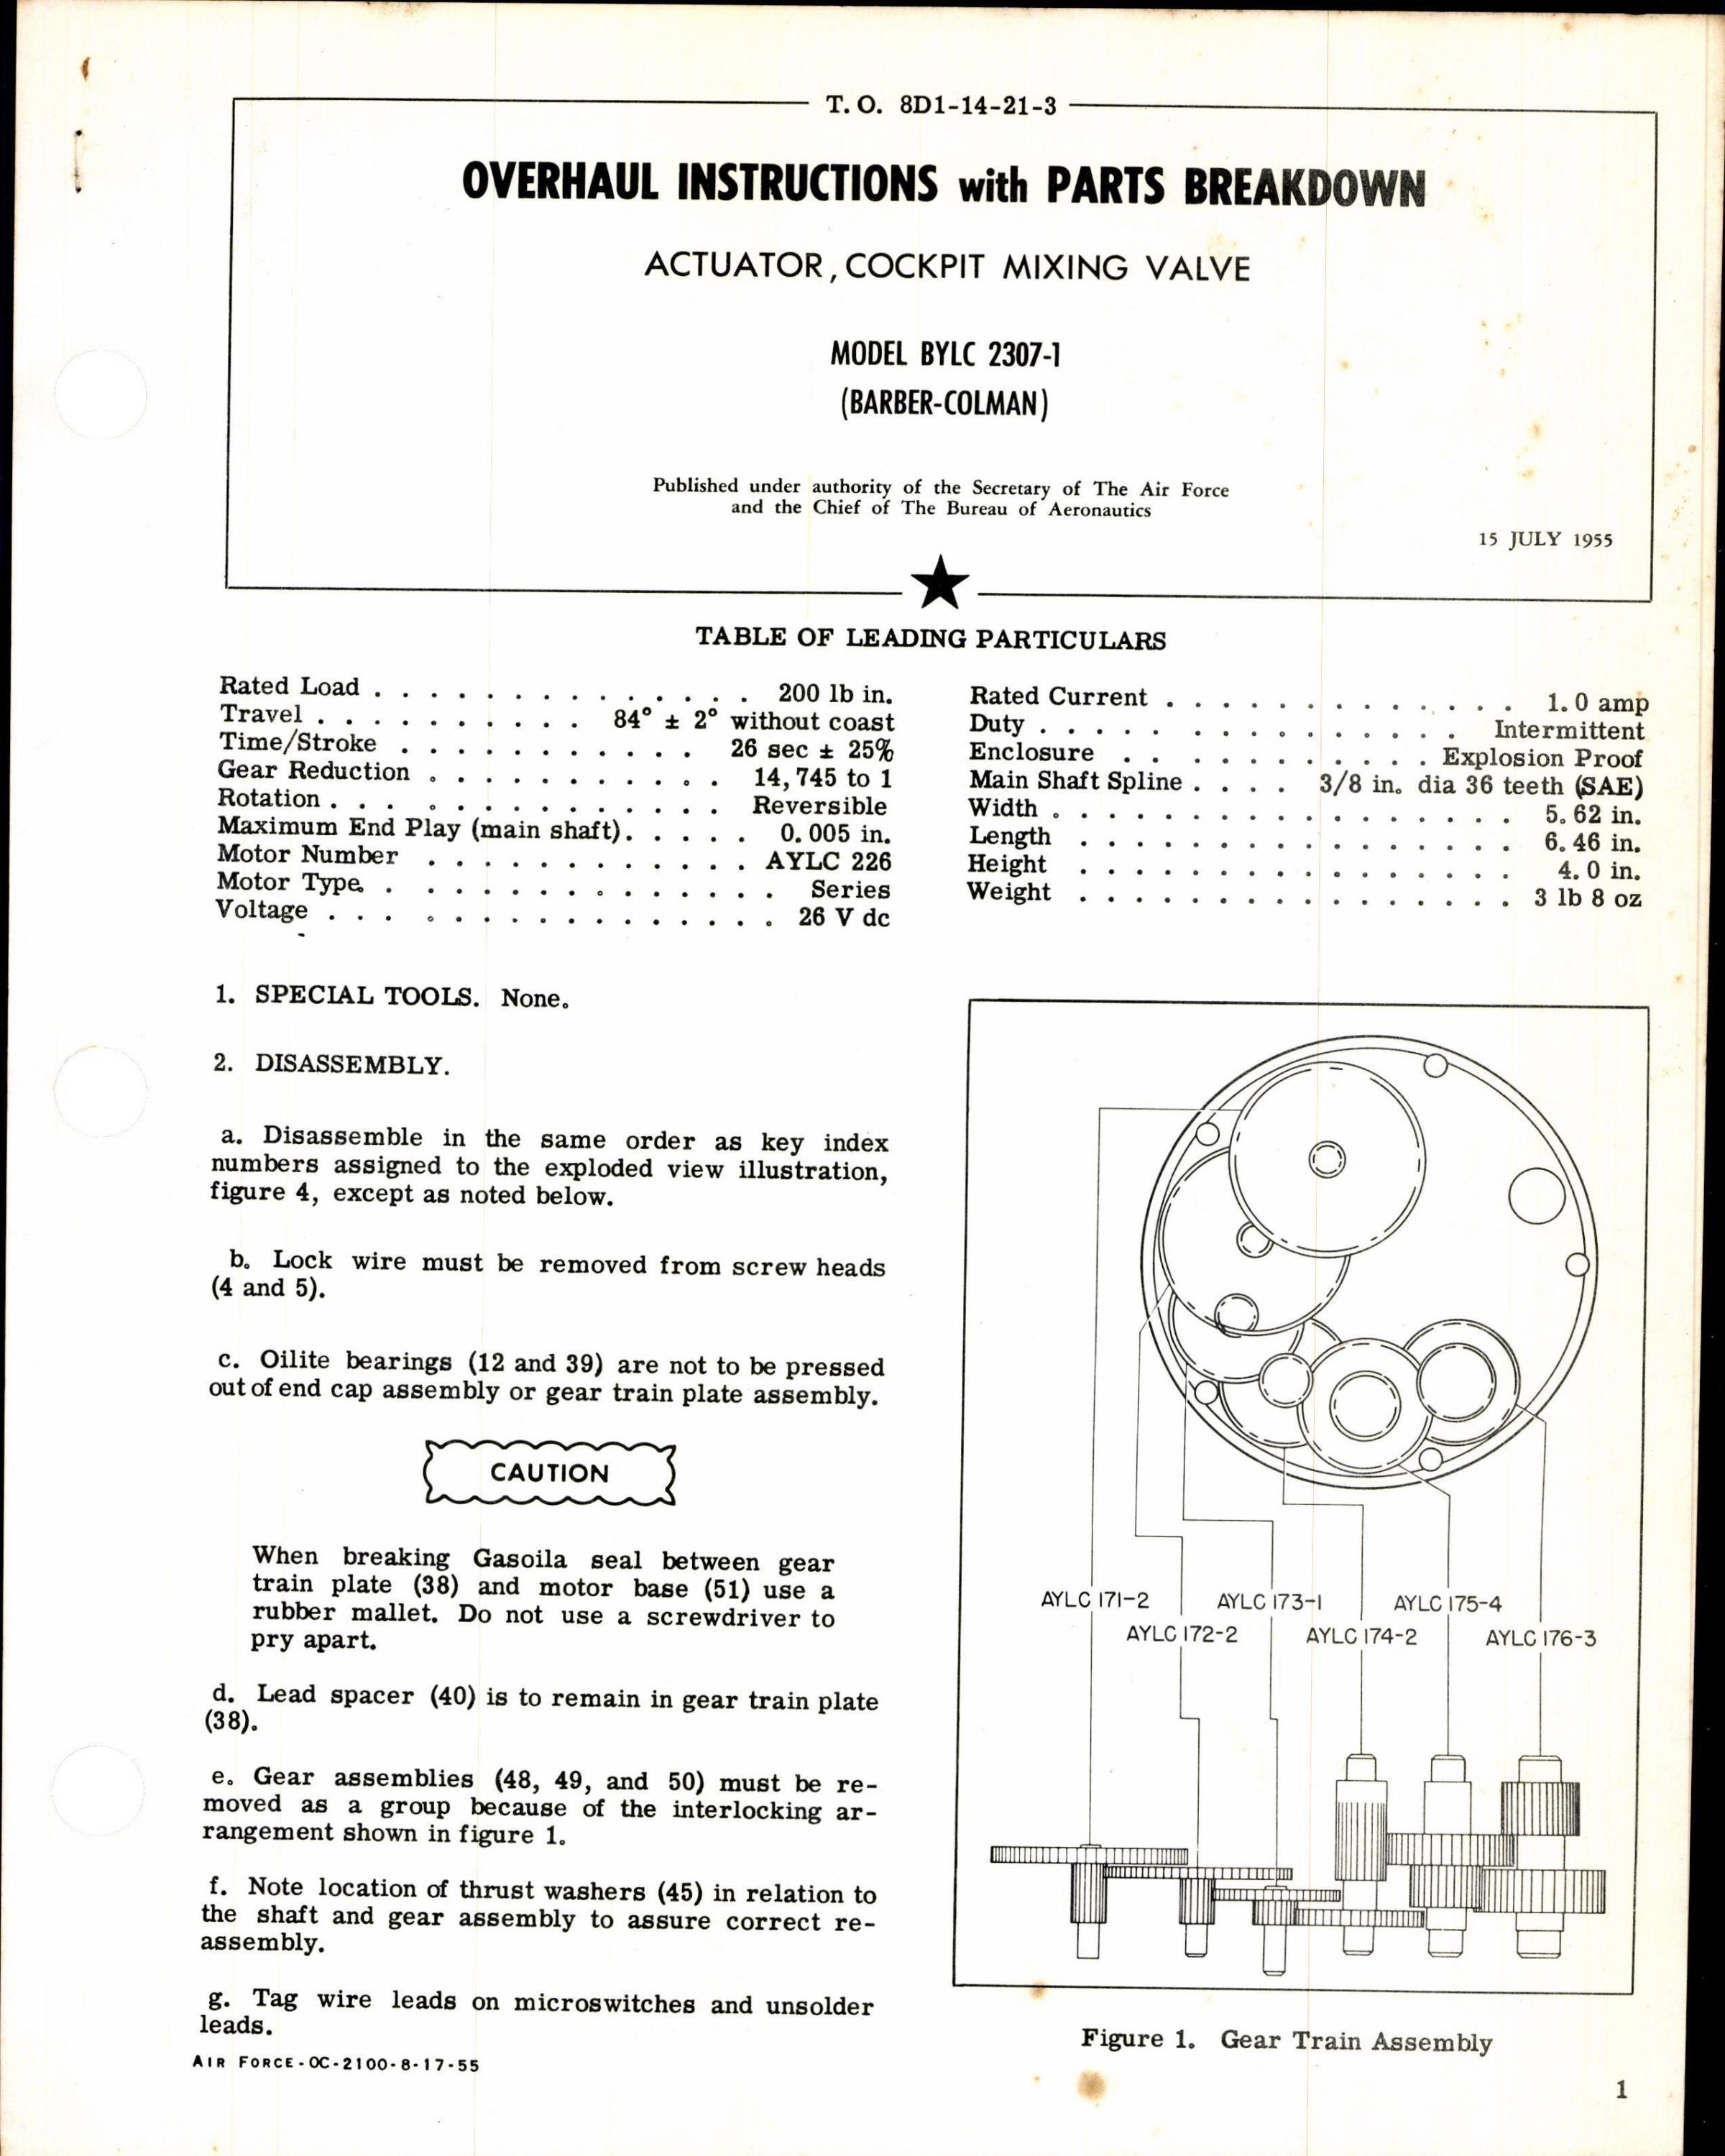 Sample page 1 from AirCorps Library document: Instructions w Parts Breakdown for Actuator, Cockpit Mixing Valve